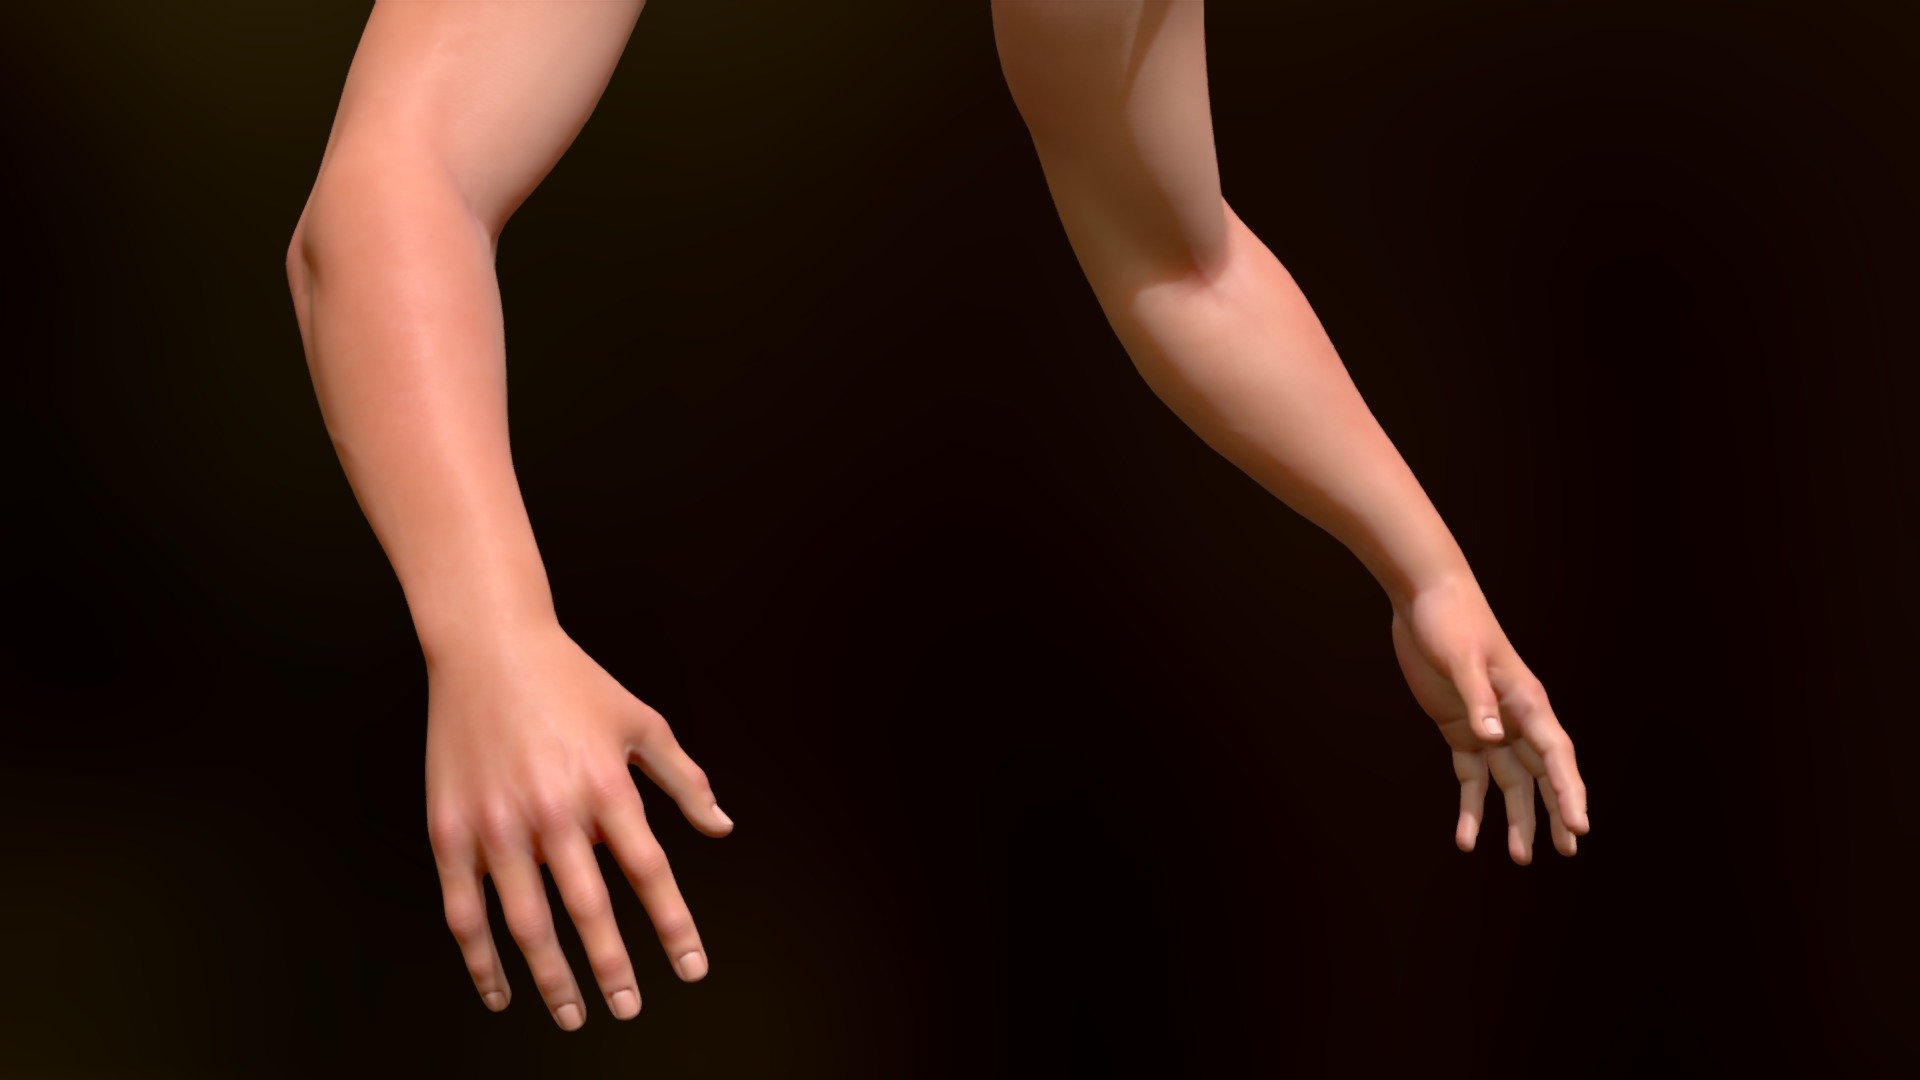 Gameready First Person Hands intended to hold up in close-up shots. If you are developing a First Person game and are struggling with sculpting organic models, then this model is intended for you.

• Model is midpoly (11000 verts) and has highly detailed anatomy features. This model is made on purpose to have a higher polygon count but still be realtime.

• Model is hand-sculpted from reference images.

• Uniform Unwrap with no overlapping.

• 4096x4096 textures.

• Tested in Unreal Engine. But should work fine with Unity or even VFX workflows.

• Topology intended for animation and ability to do a high range of motion, such as spreading the fingers or making a fist.

• Topology can be subdivided and is made with zero triangles, all quads.

• Model is not rigged 

Model is intended for sale but not yet available, feel free to contact me for freelancing opportunities trough email &ldquo;odrcic.matija